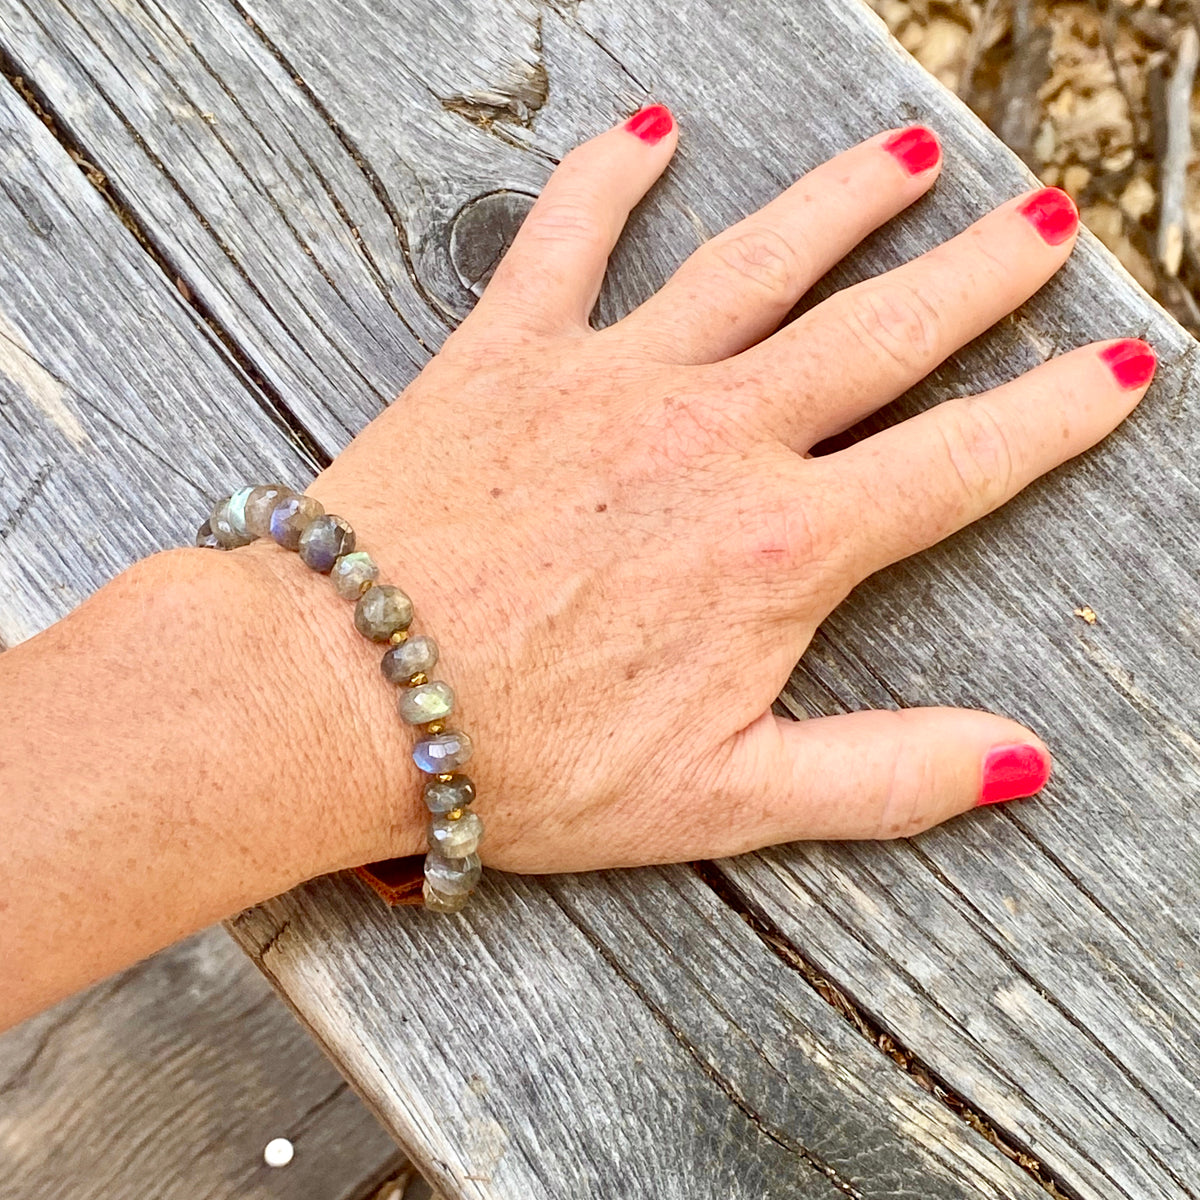 Serenity Labradorite Bracelet - Necklace Combo for a Positive Change in Your Life